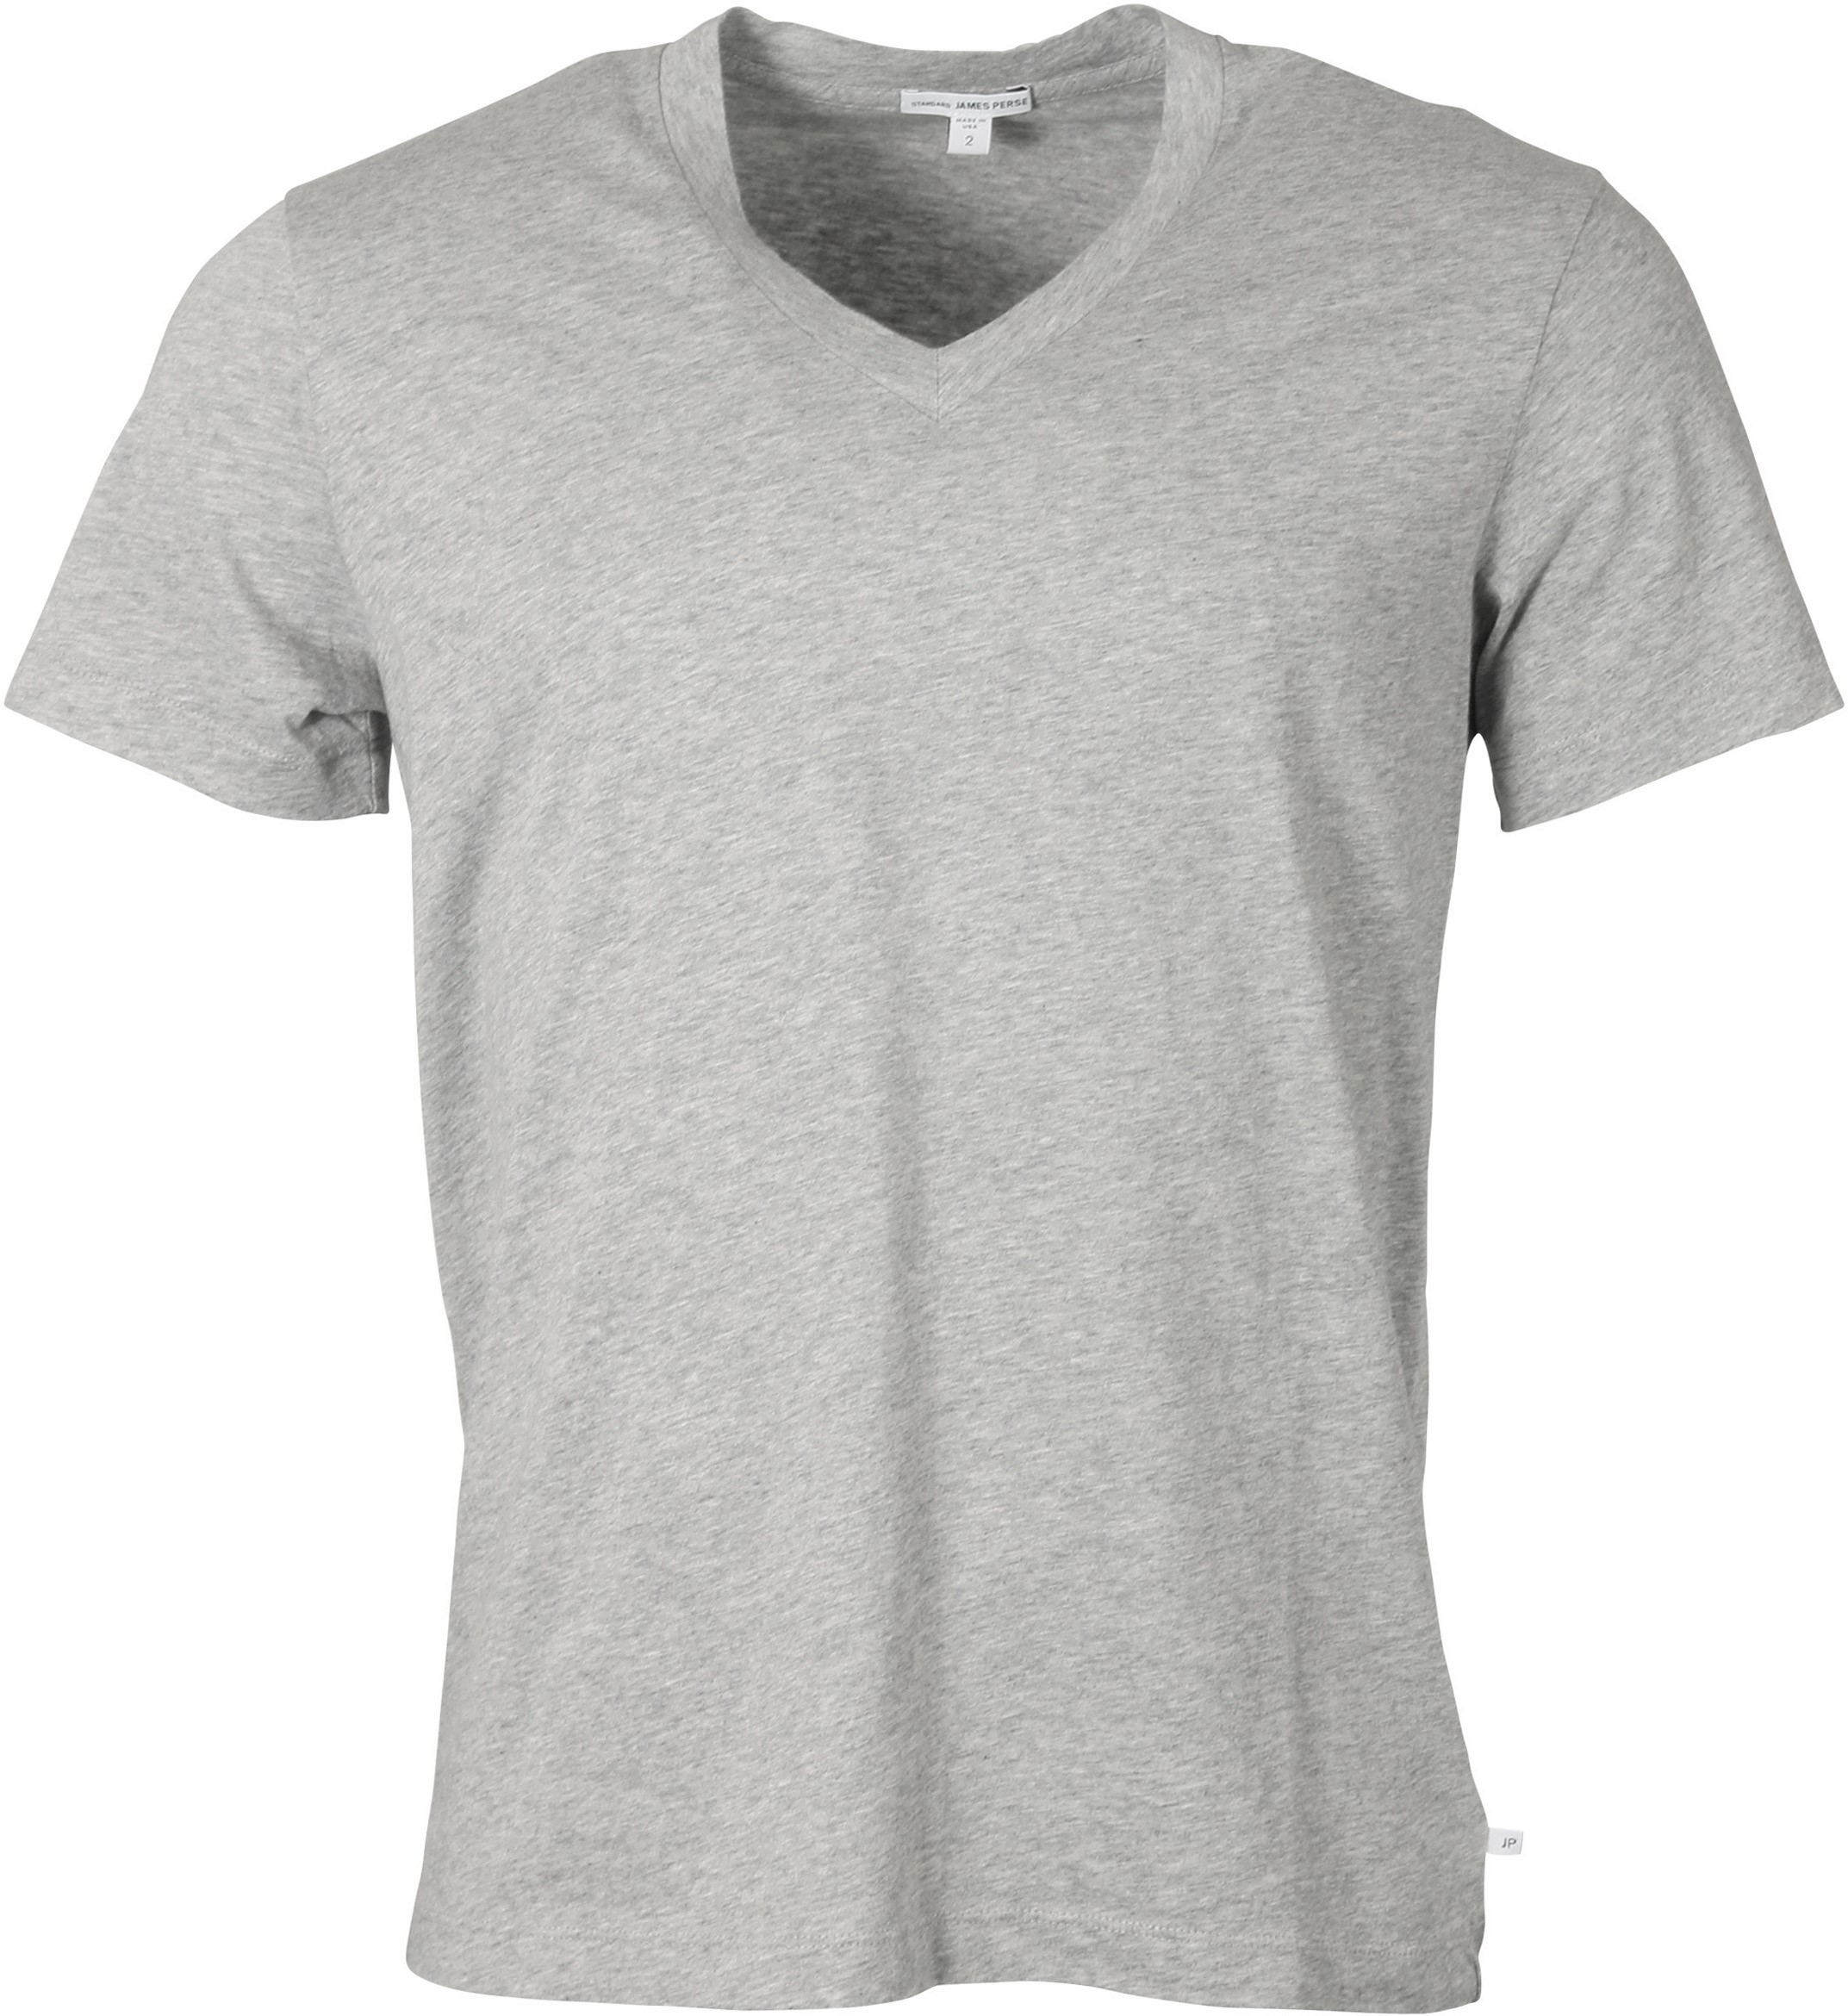 James Perse T-Shirt V-Neck in Heathergrey S/1